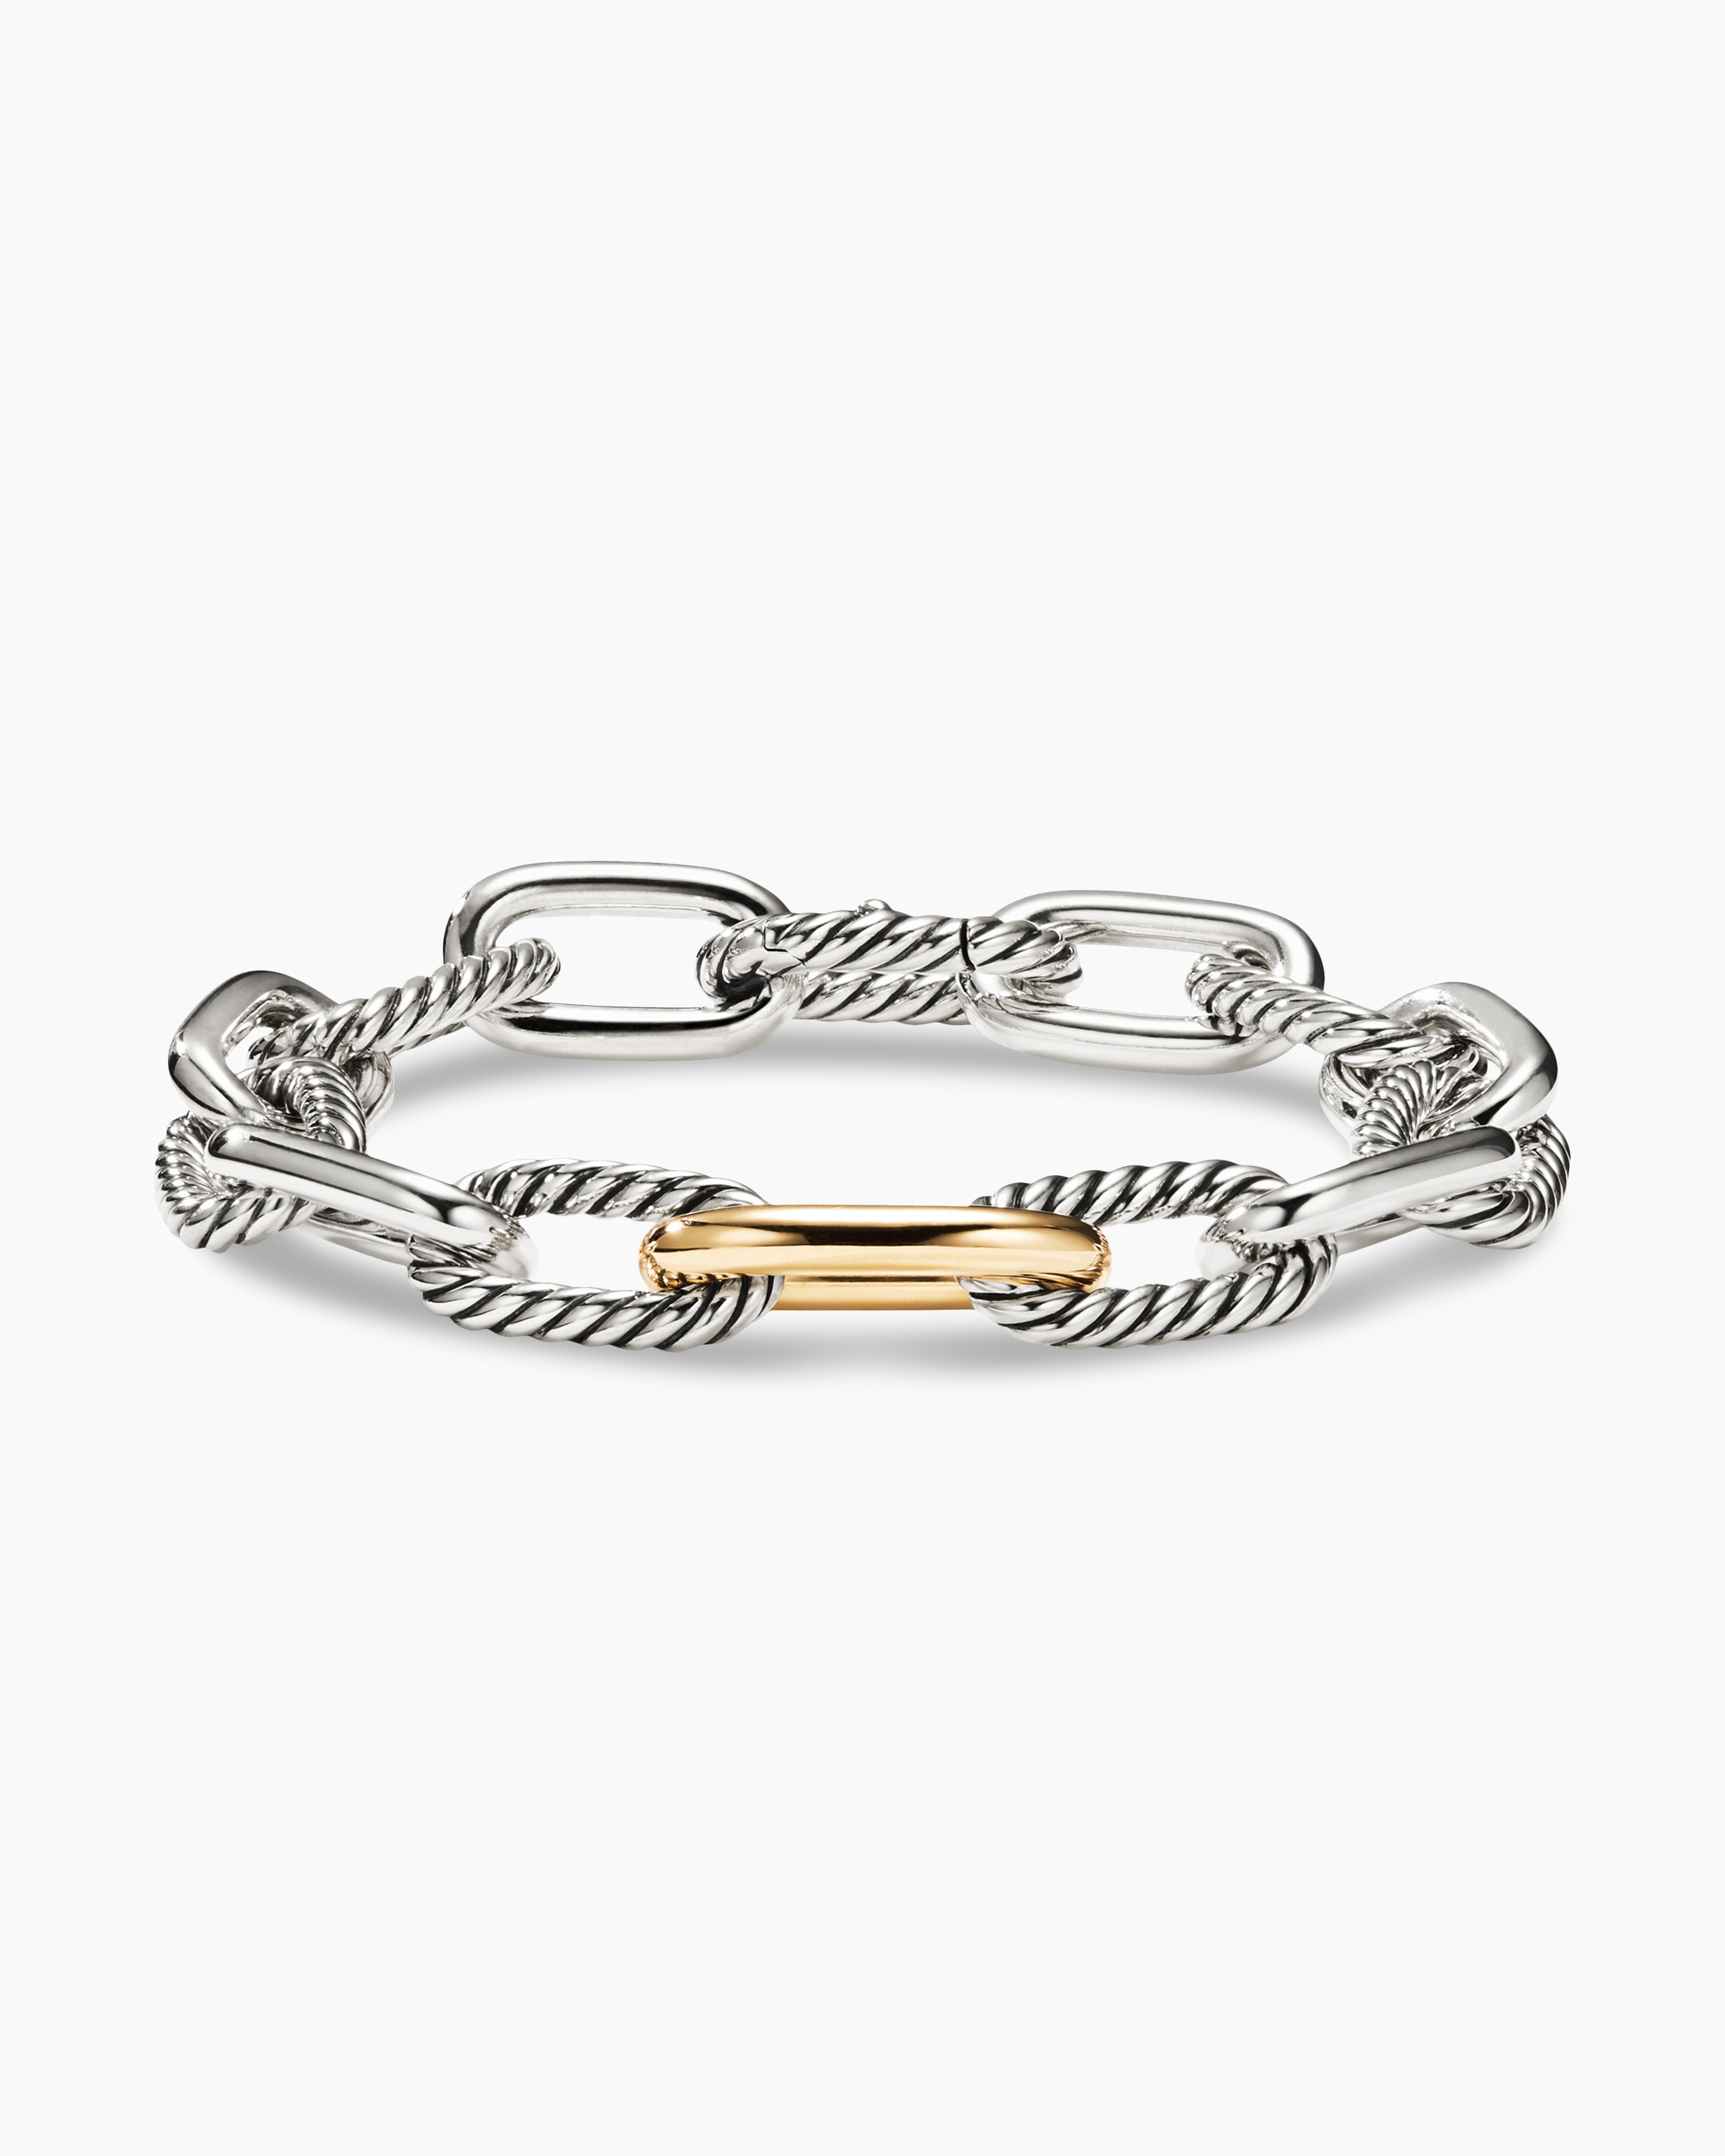 DY Madison Chain Bracelet in Sterling Silver with 18K Yellow Gold, 11mm